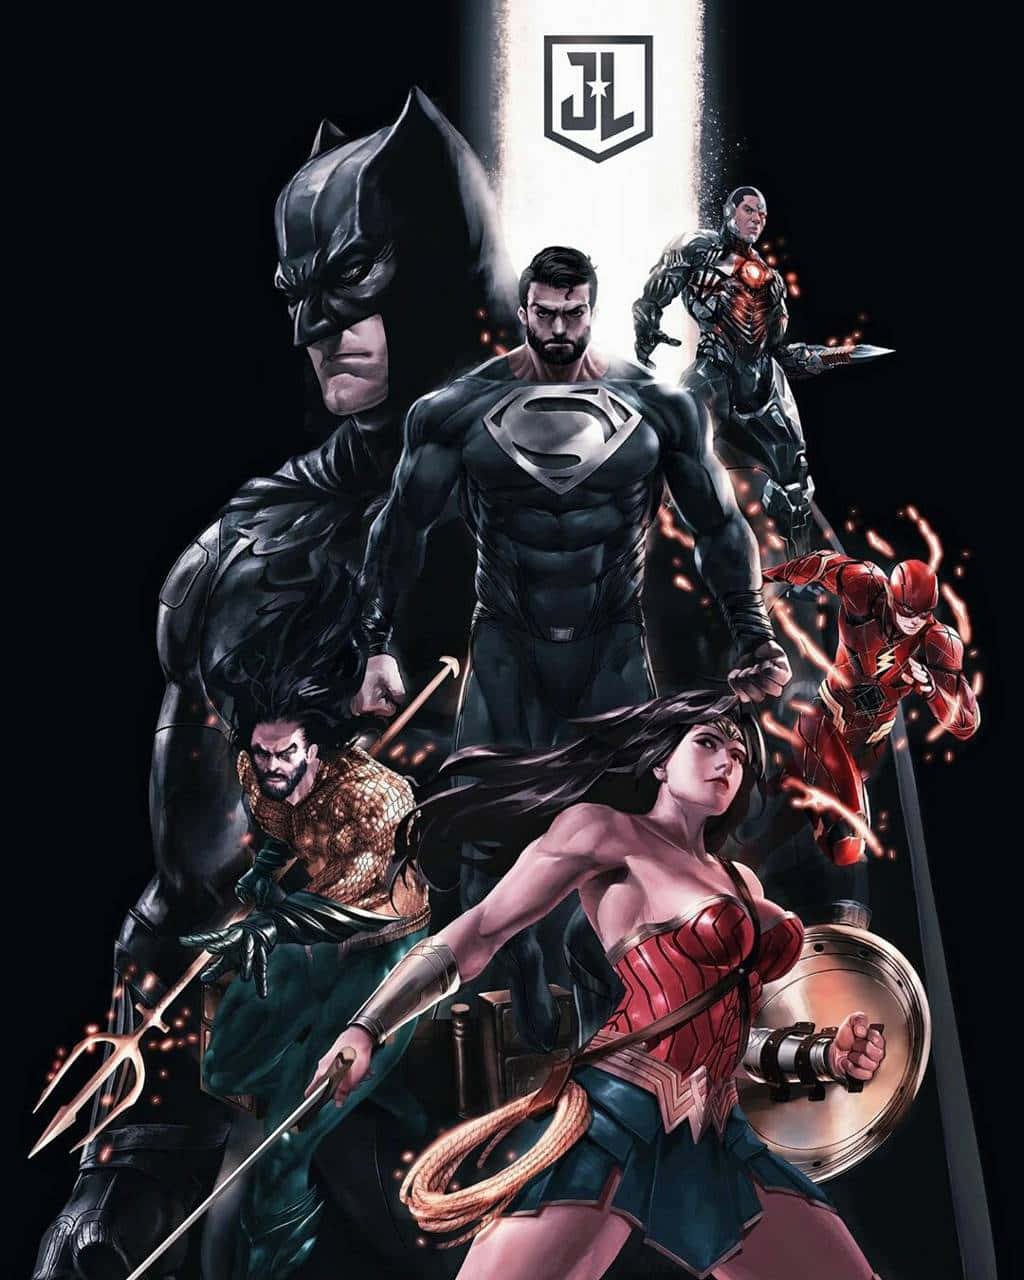 The Justice League prepare to face their toughest foes in Zack Snyder's Justice League Wallpaper